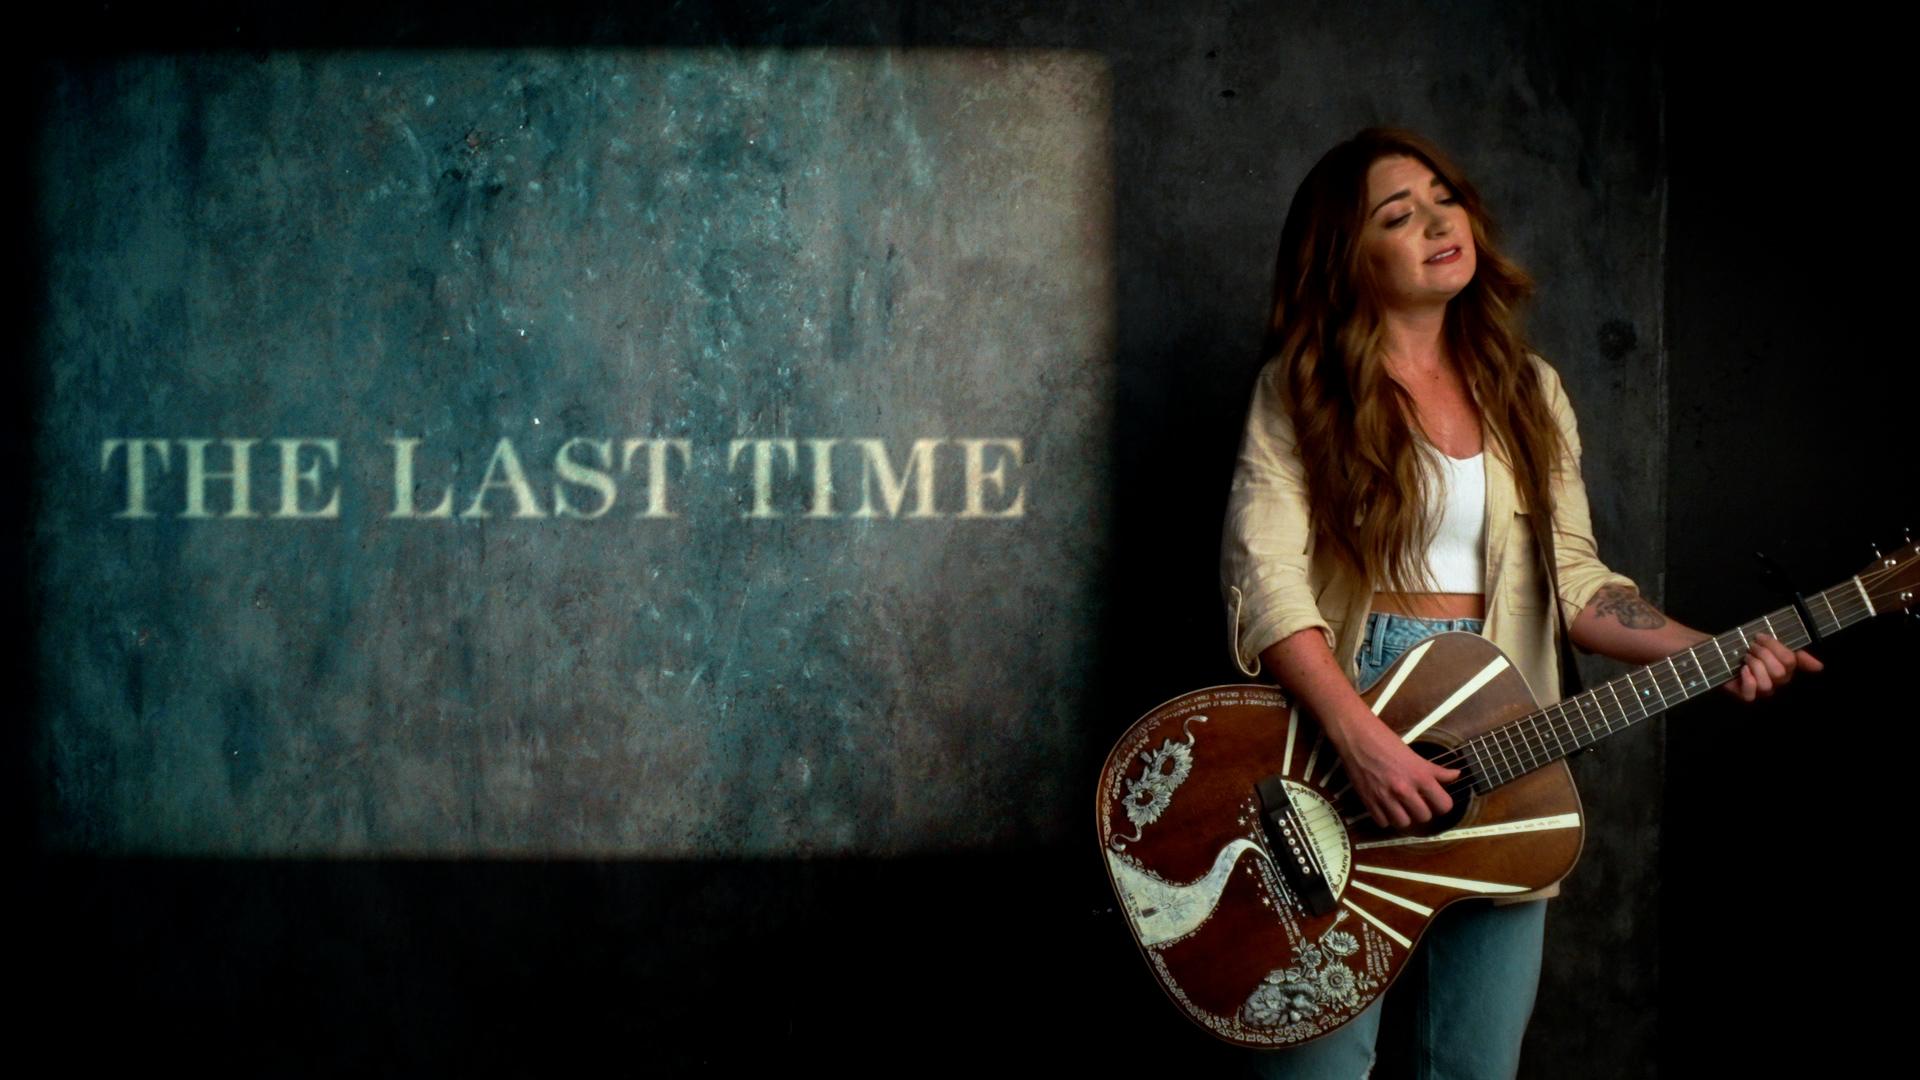 Tenille Townes - The Last Time (Official Lyric Video)